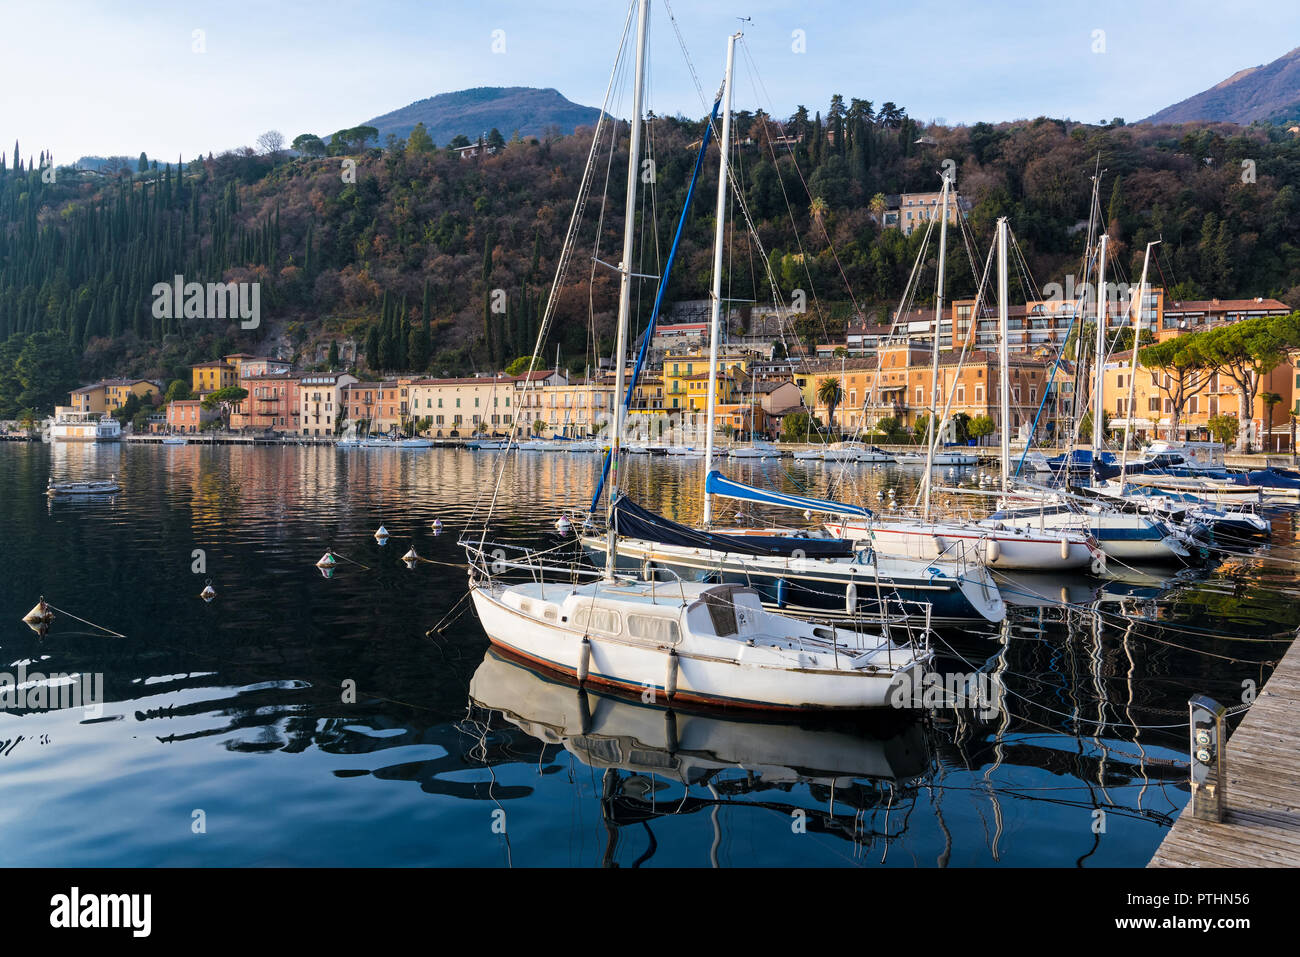 Various boats at the lake Garda, as seen from the coast of the town of Toscolano Maderno in Italy Stock Photo